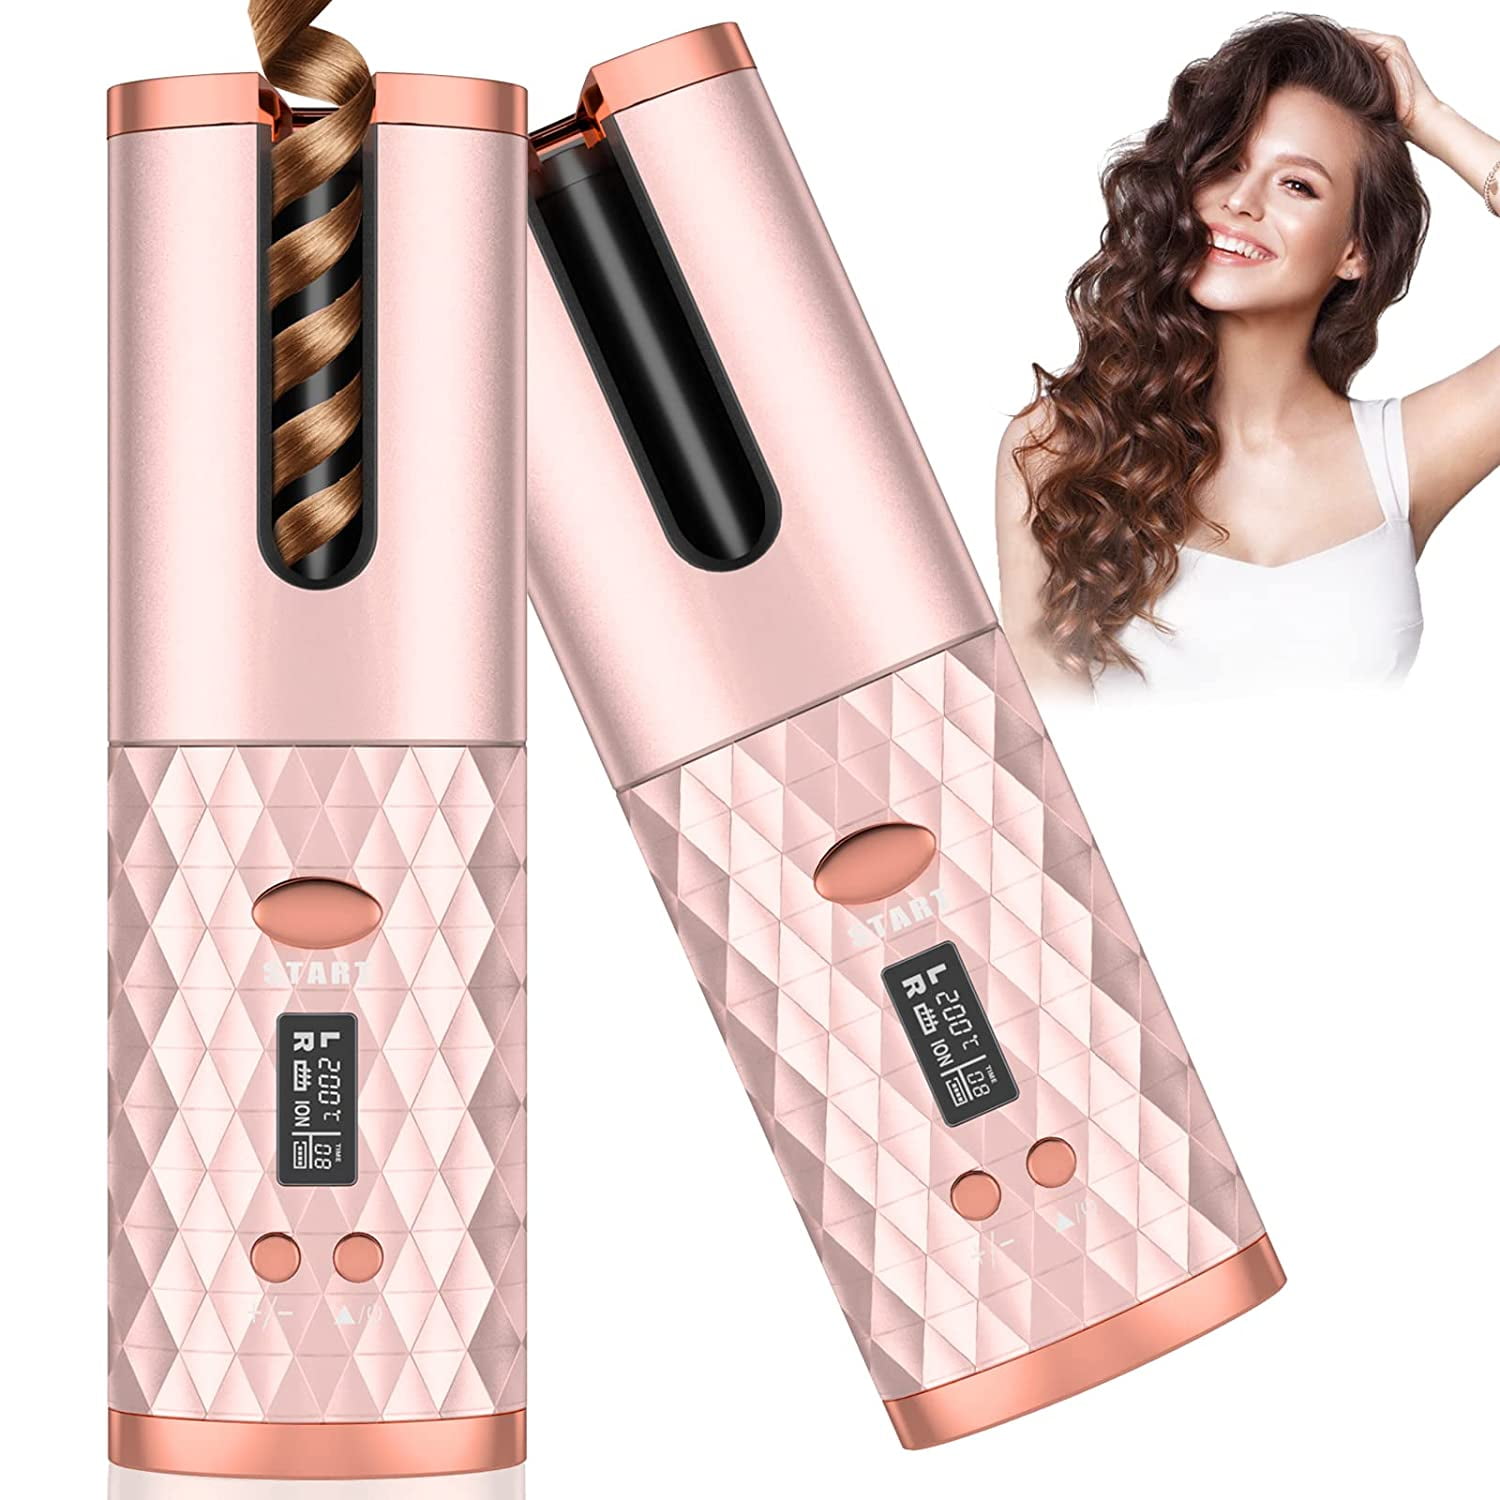 Buy Borke Automatic Curling Iron Cordless Auto Hair Curler Rechargeable  Ceramic Barrel Wave Wand Portable Rotating Curling Online at Lowest Price  in Ubuy Nepal. 999141659